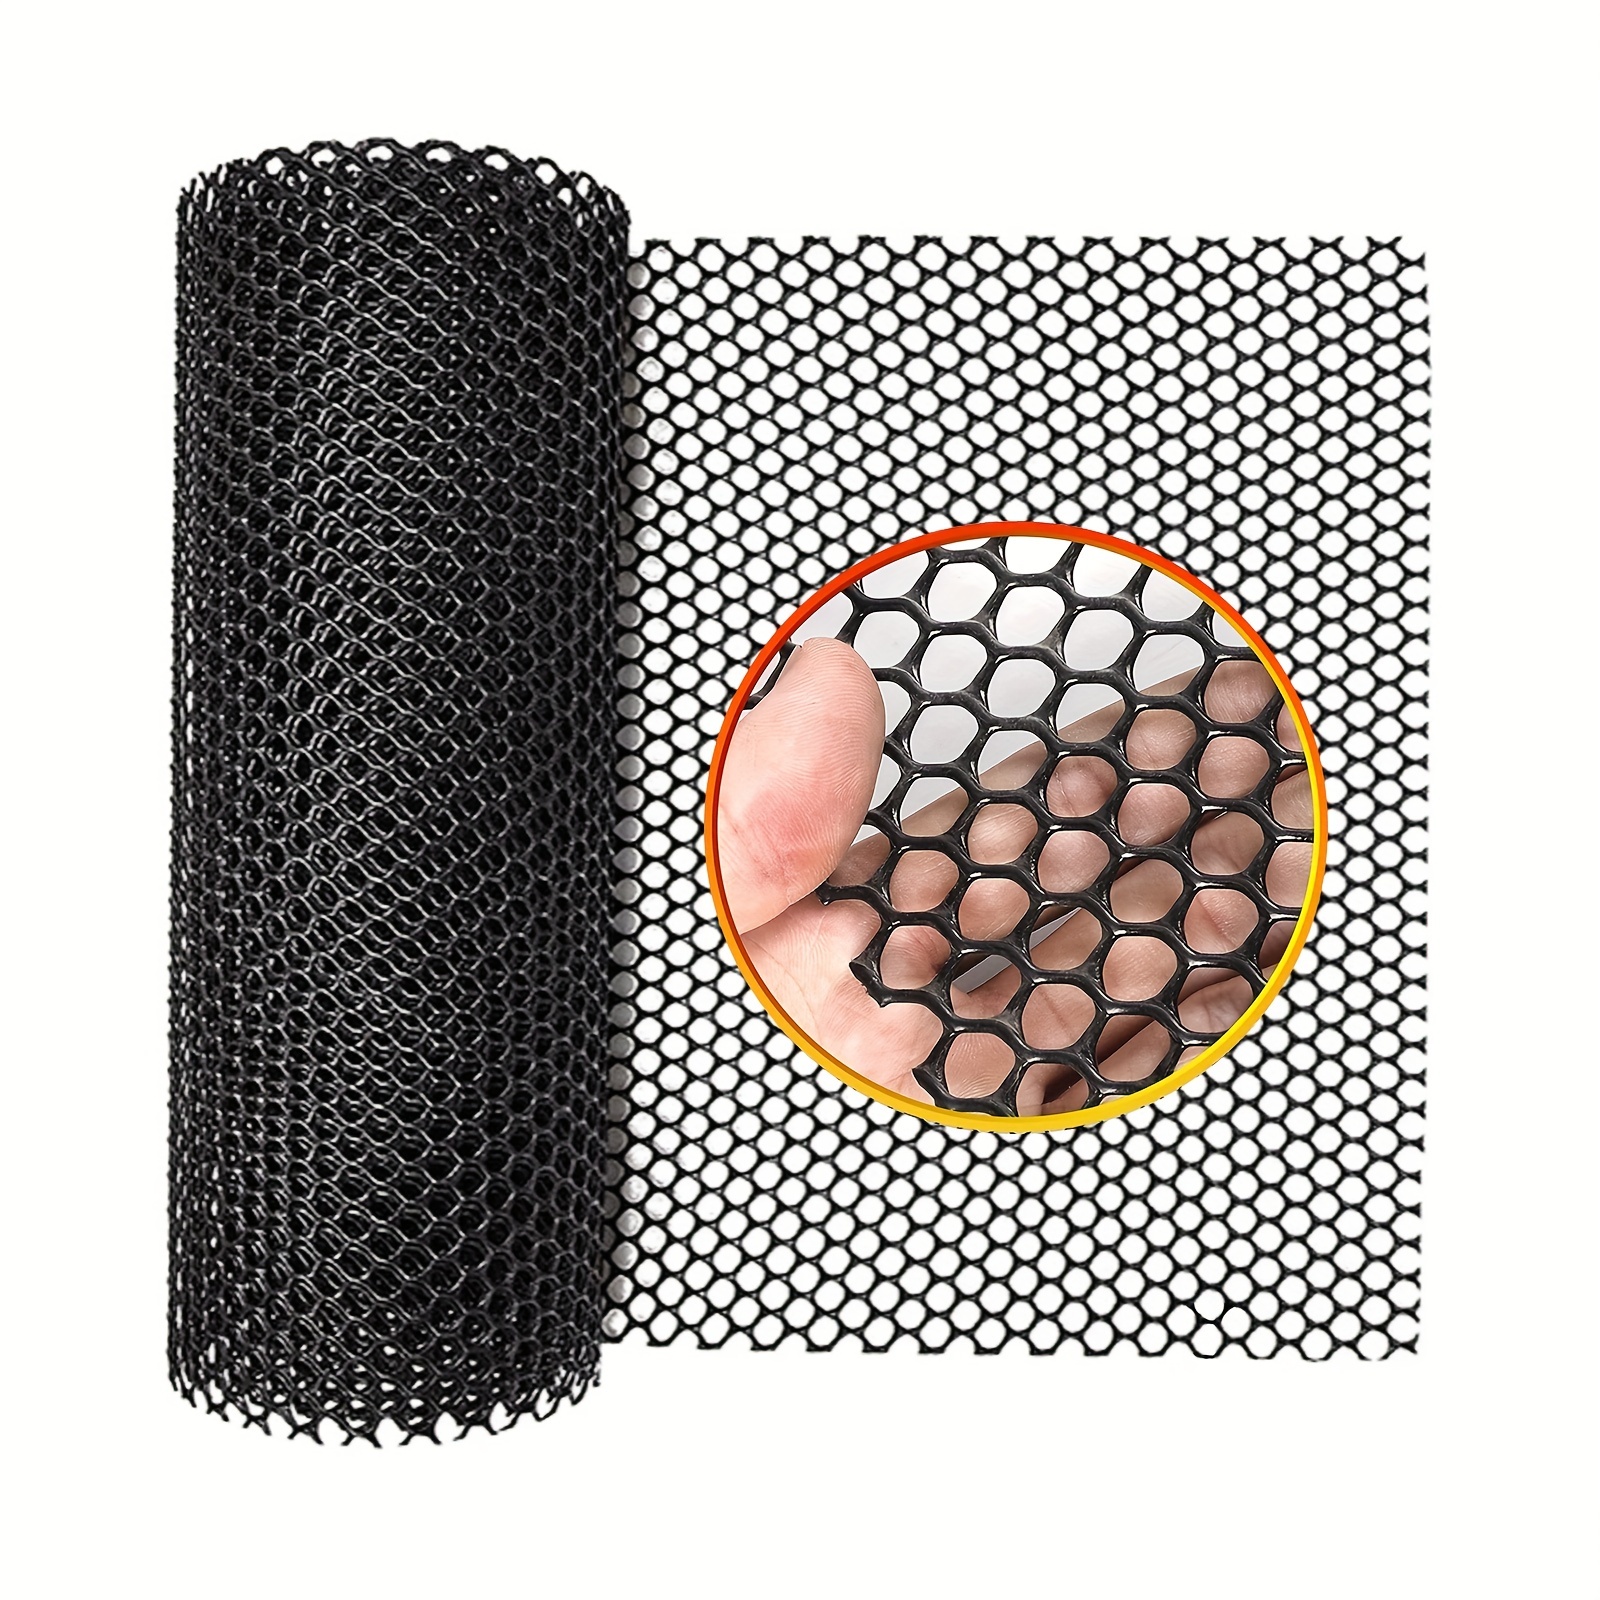 1pc Black Plastic Chicken Wire Fence Mesh, Hexagonal Fencing Wire For  Gardening, Poultry Fencing, Chicken Wire Frame For Crafts, Floral Netting  (Black